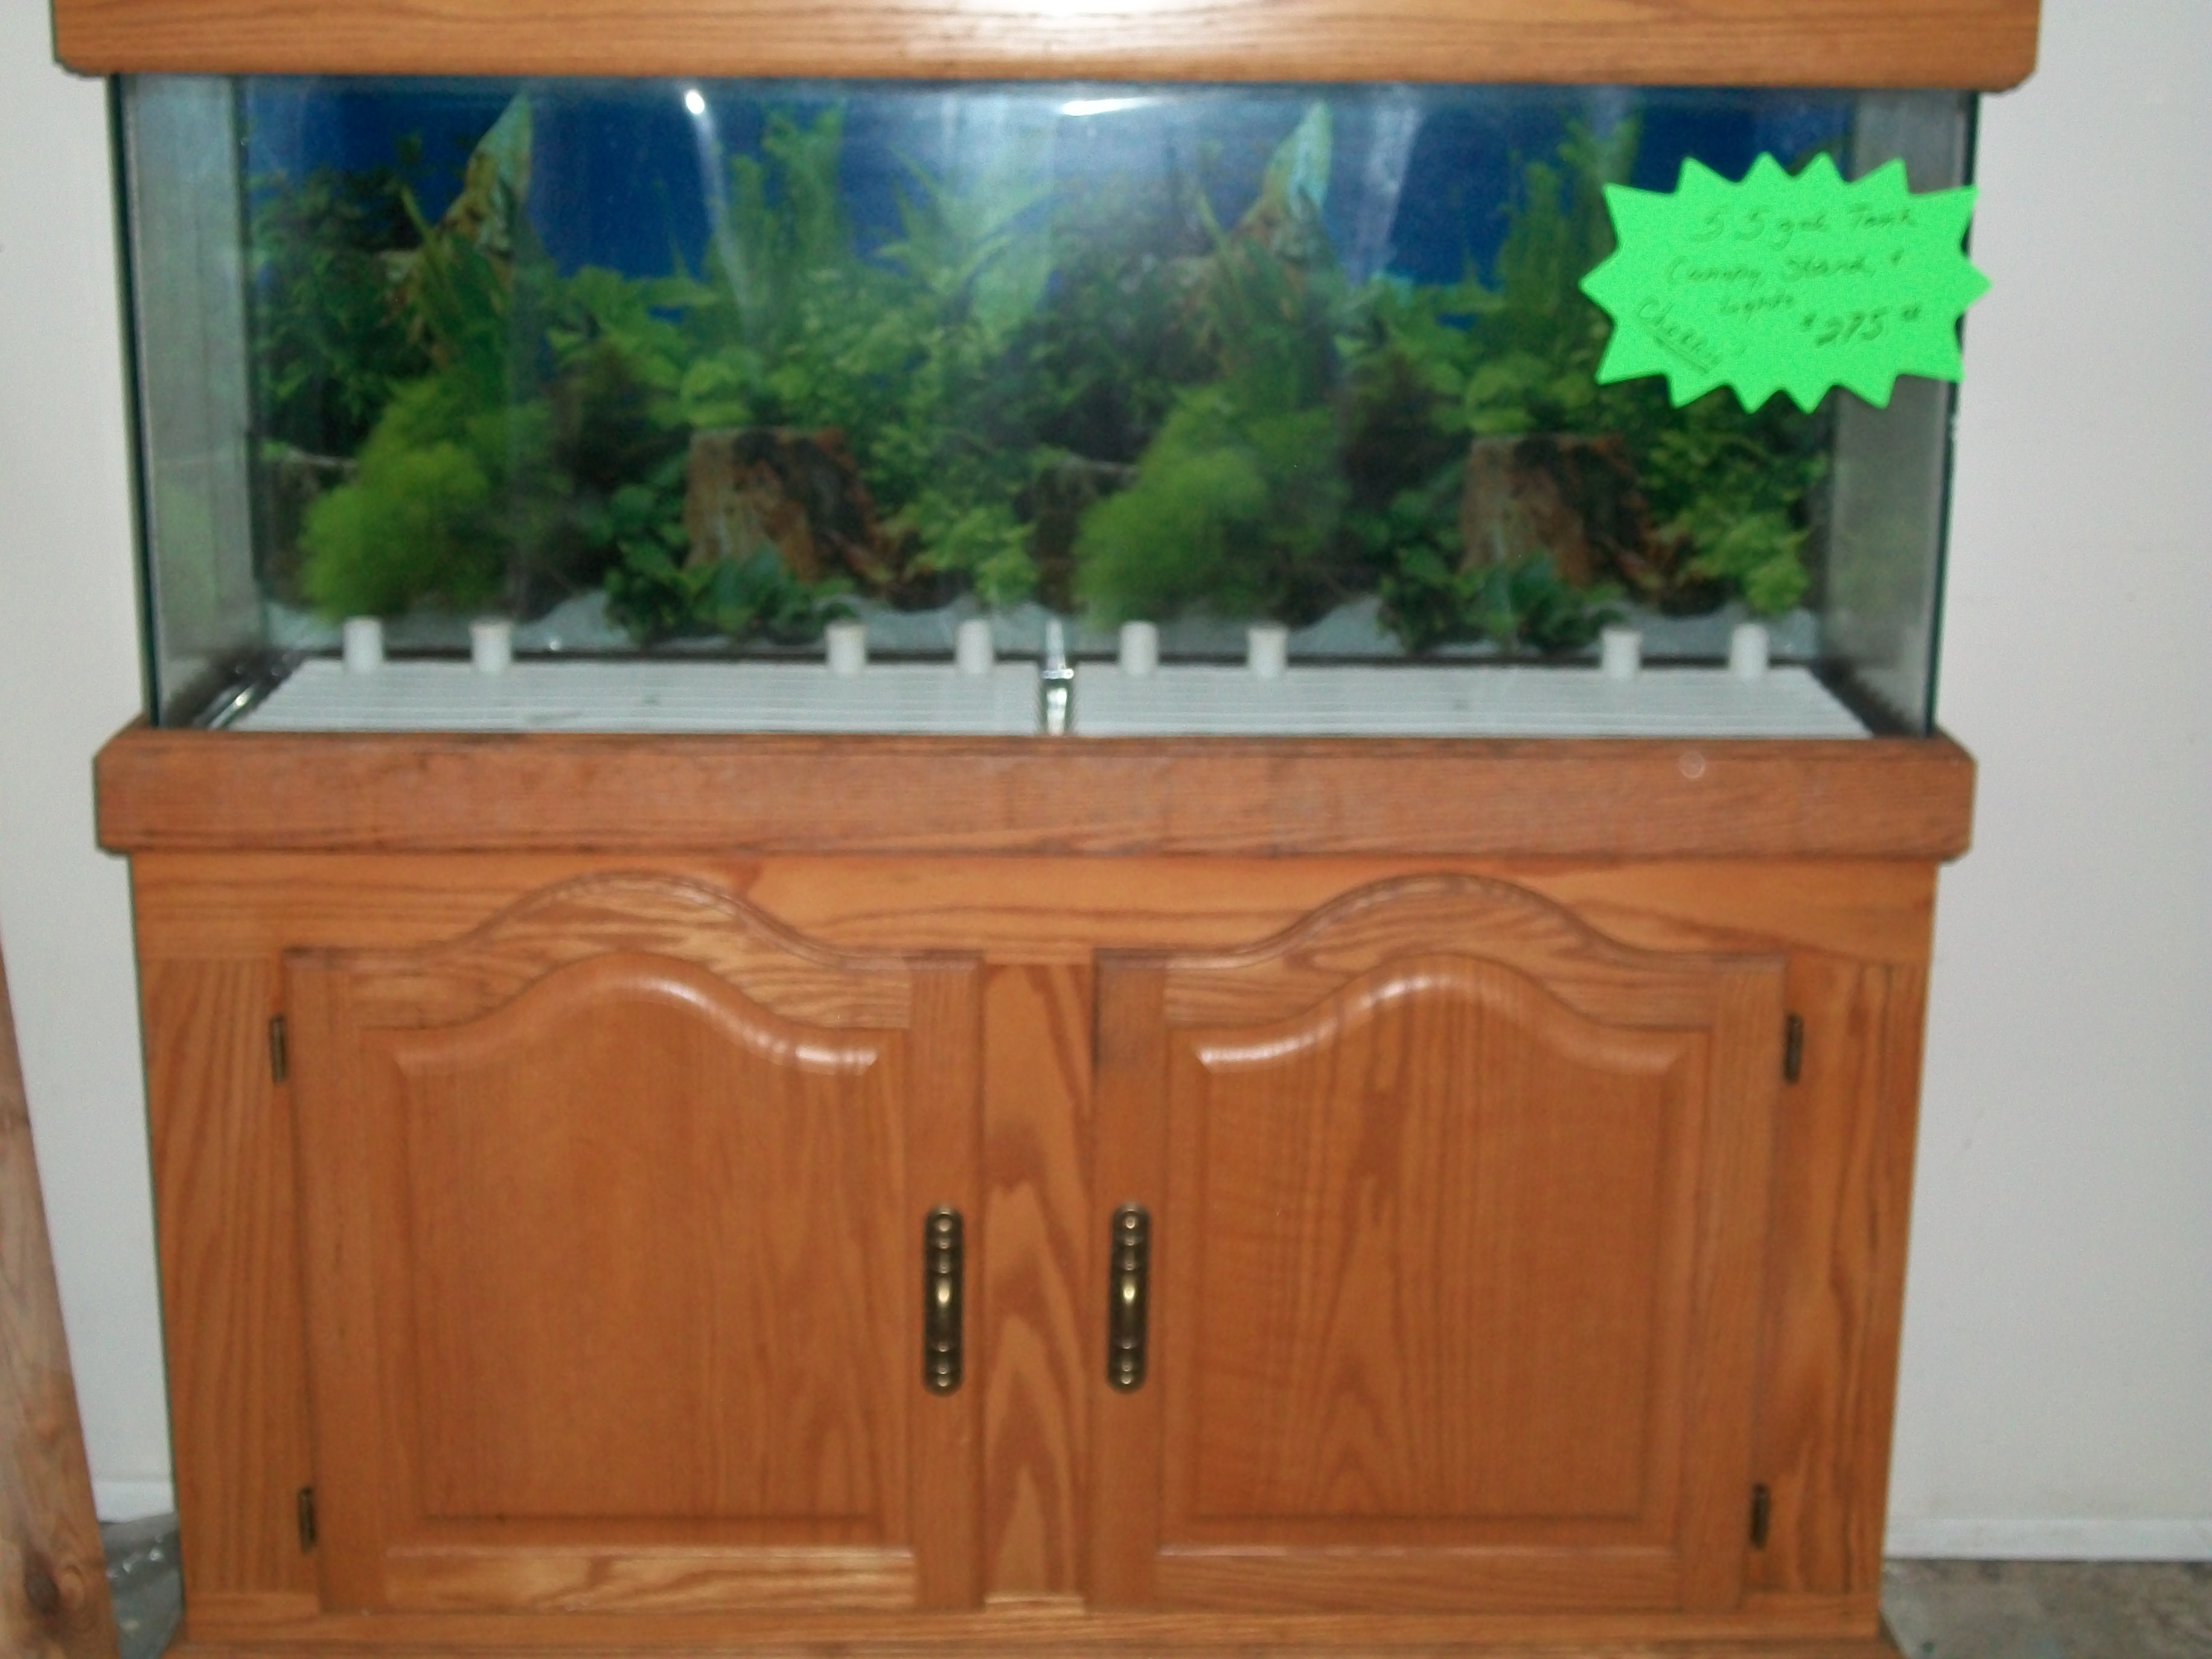 55 gallon aquarium with Oak stand and Canopy